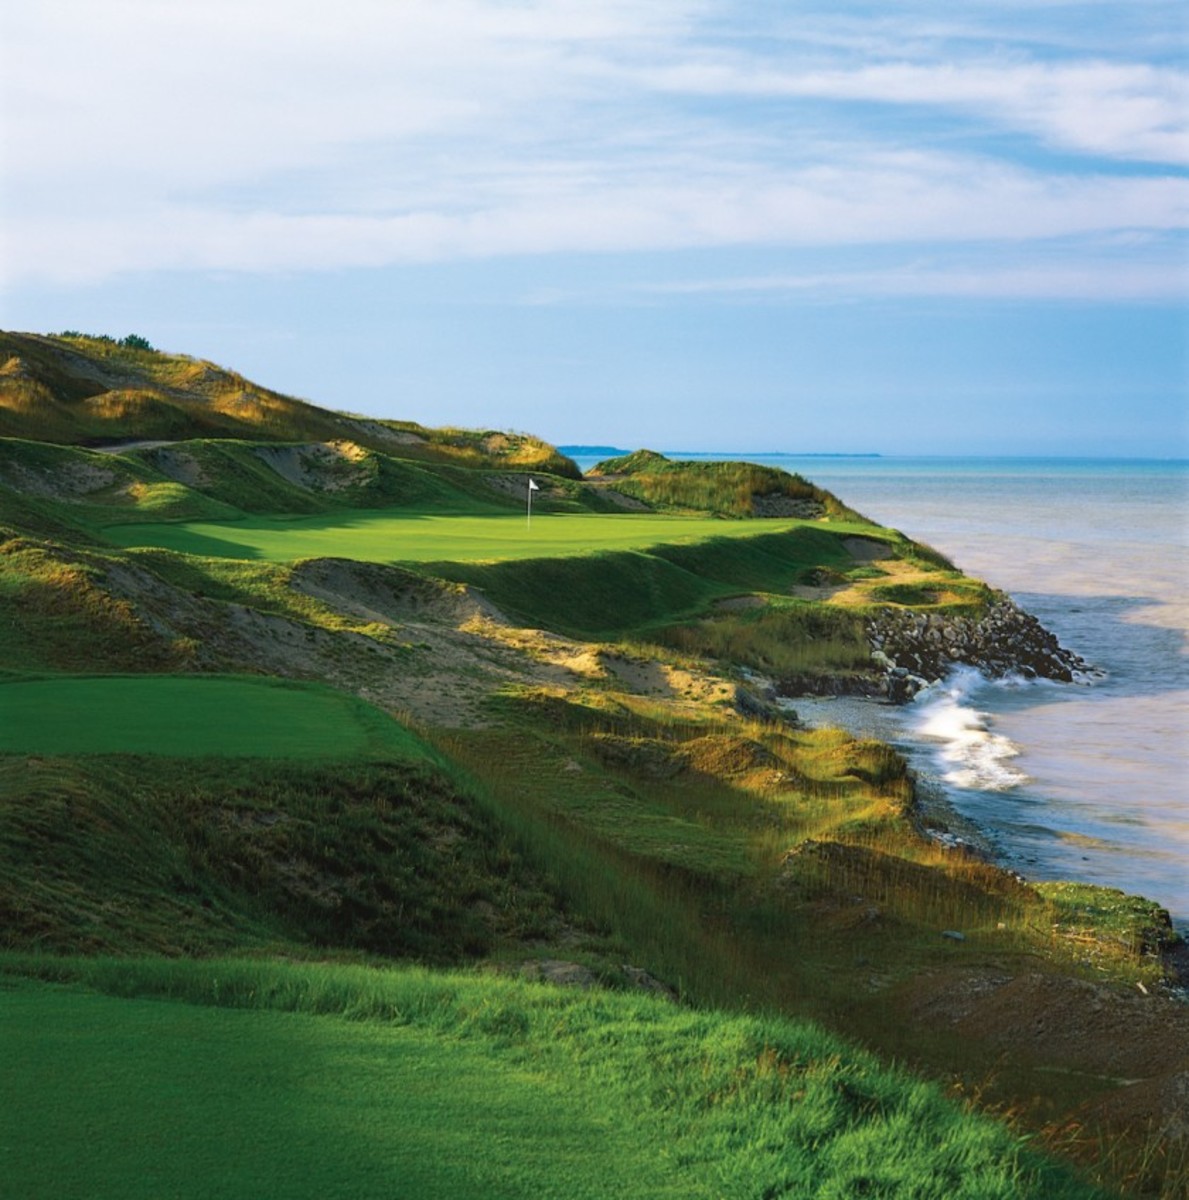 The Straits' par-3 seventh hole, which sits hard against Lake Michigan, leaves little room for error to either the left or right.